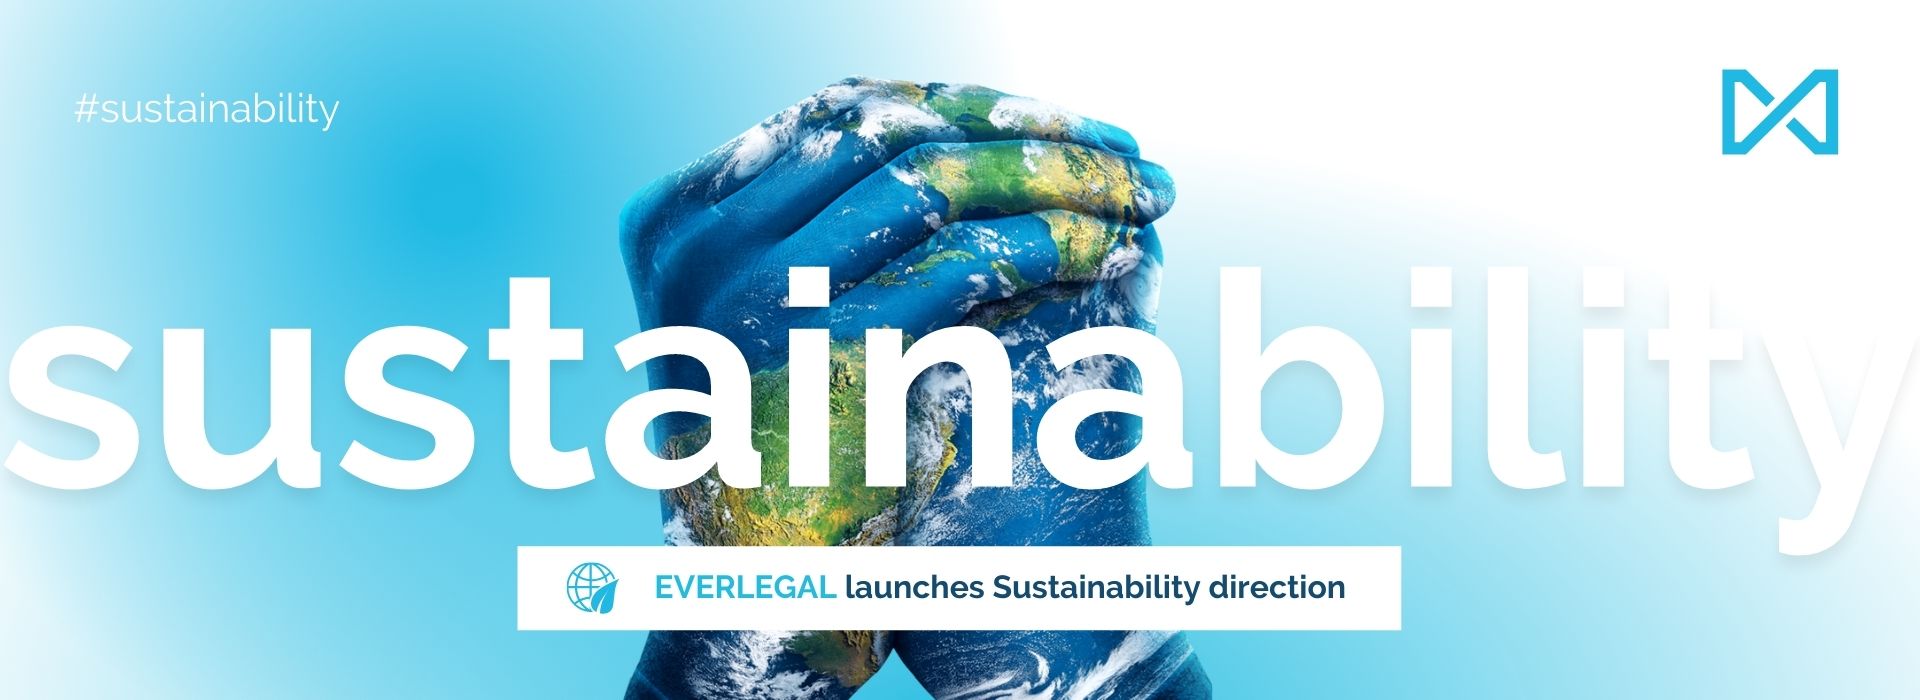 EVERLEGAL law firm launches Sustainability direction